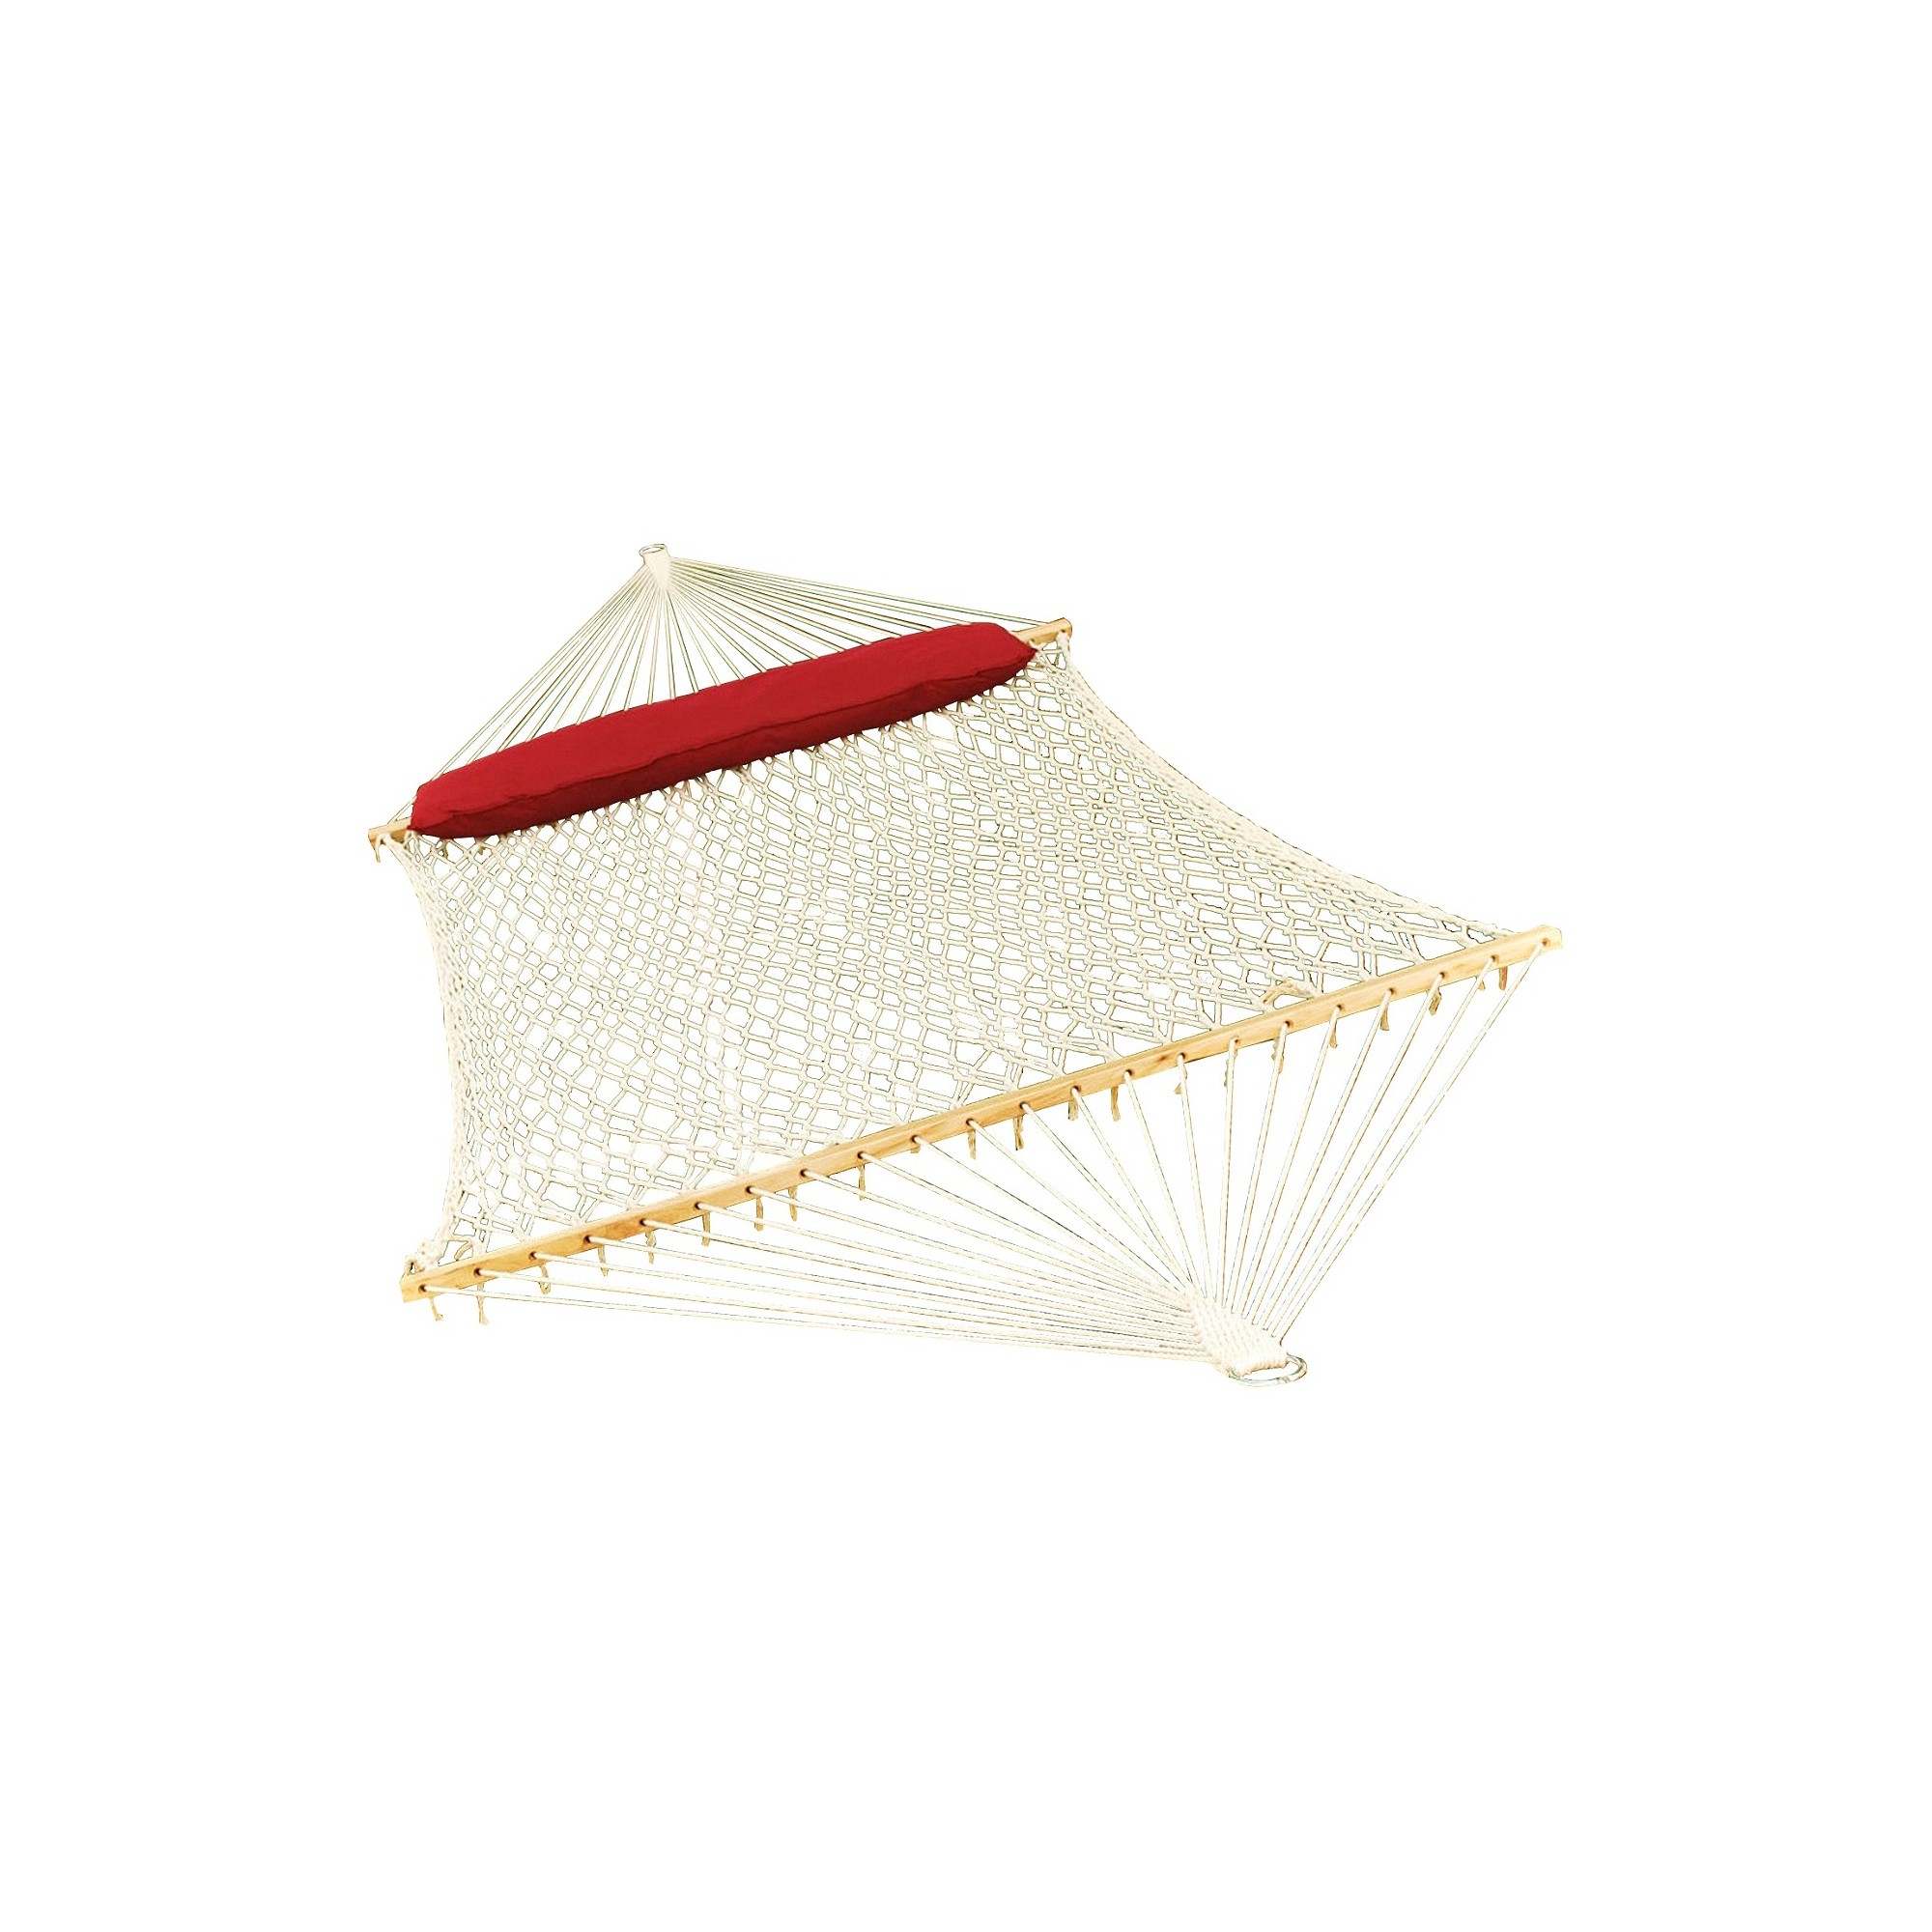 Deluxe Double Rope Hammock - Natural